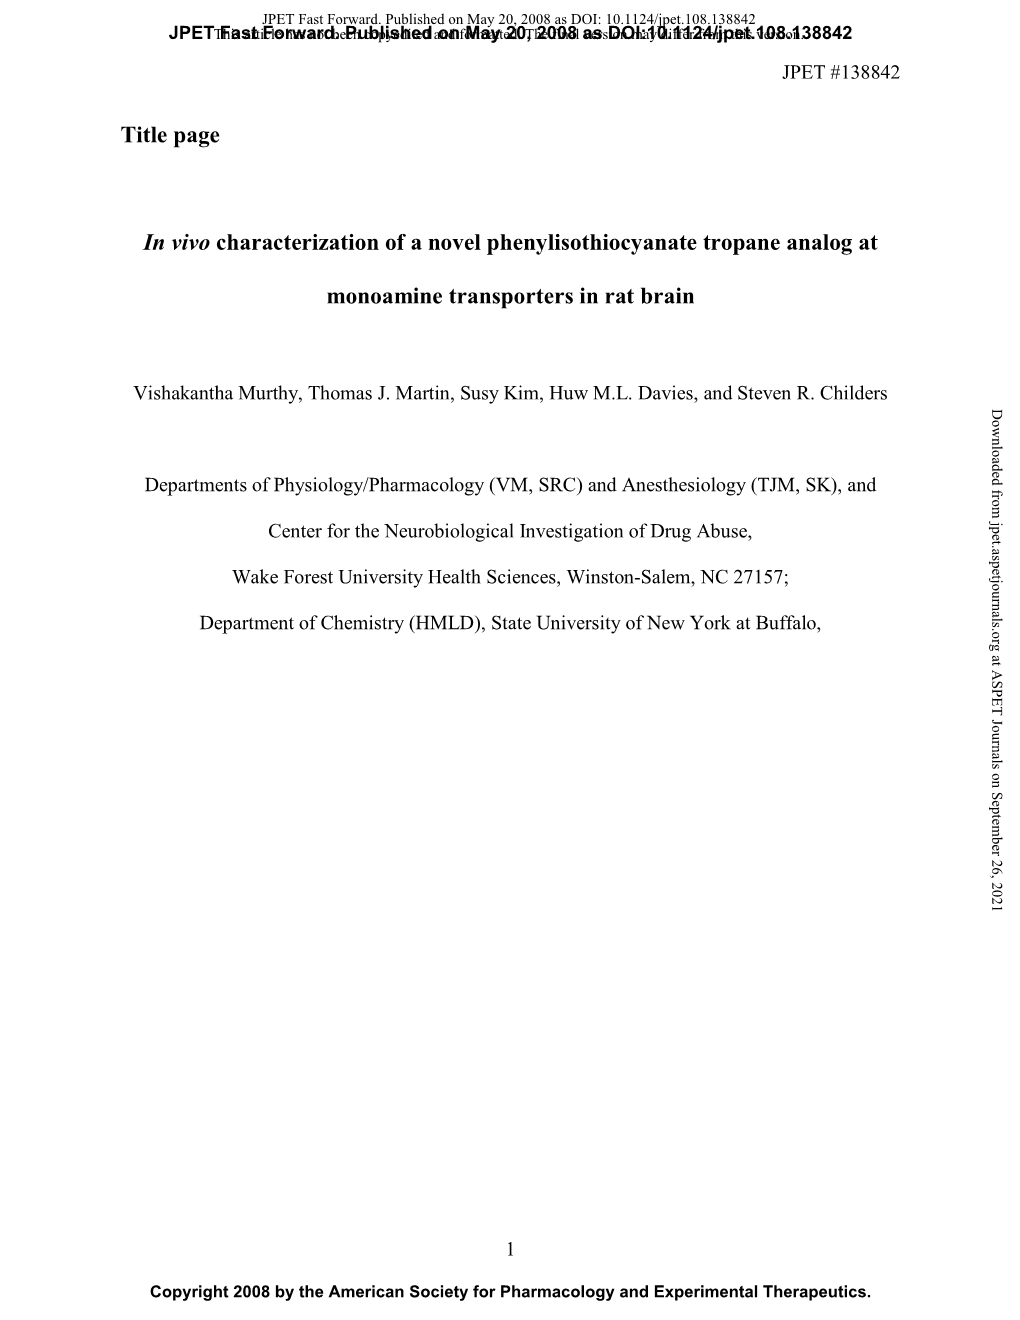 Title Page in Vivo Characterization of a Novel Phenylisothiocyanate